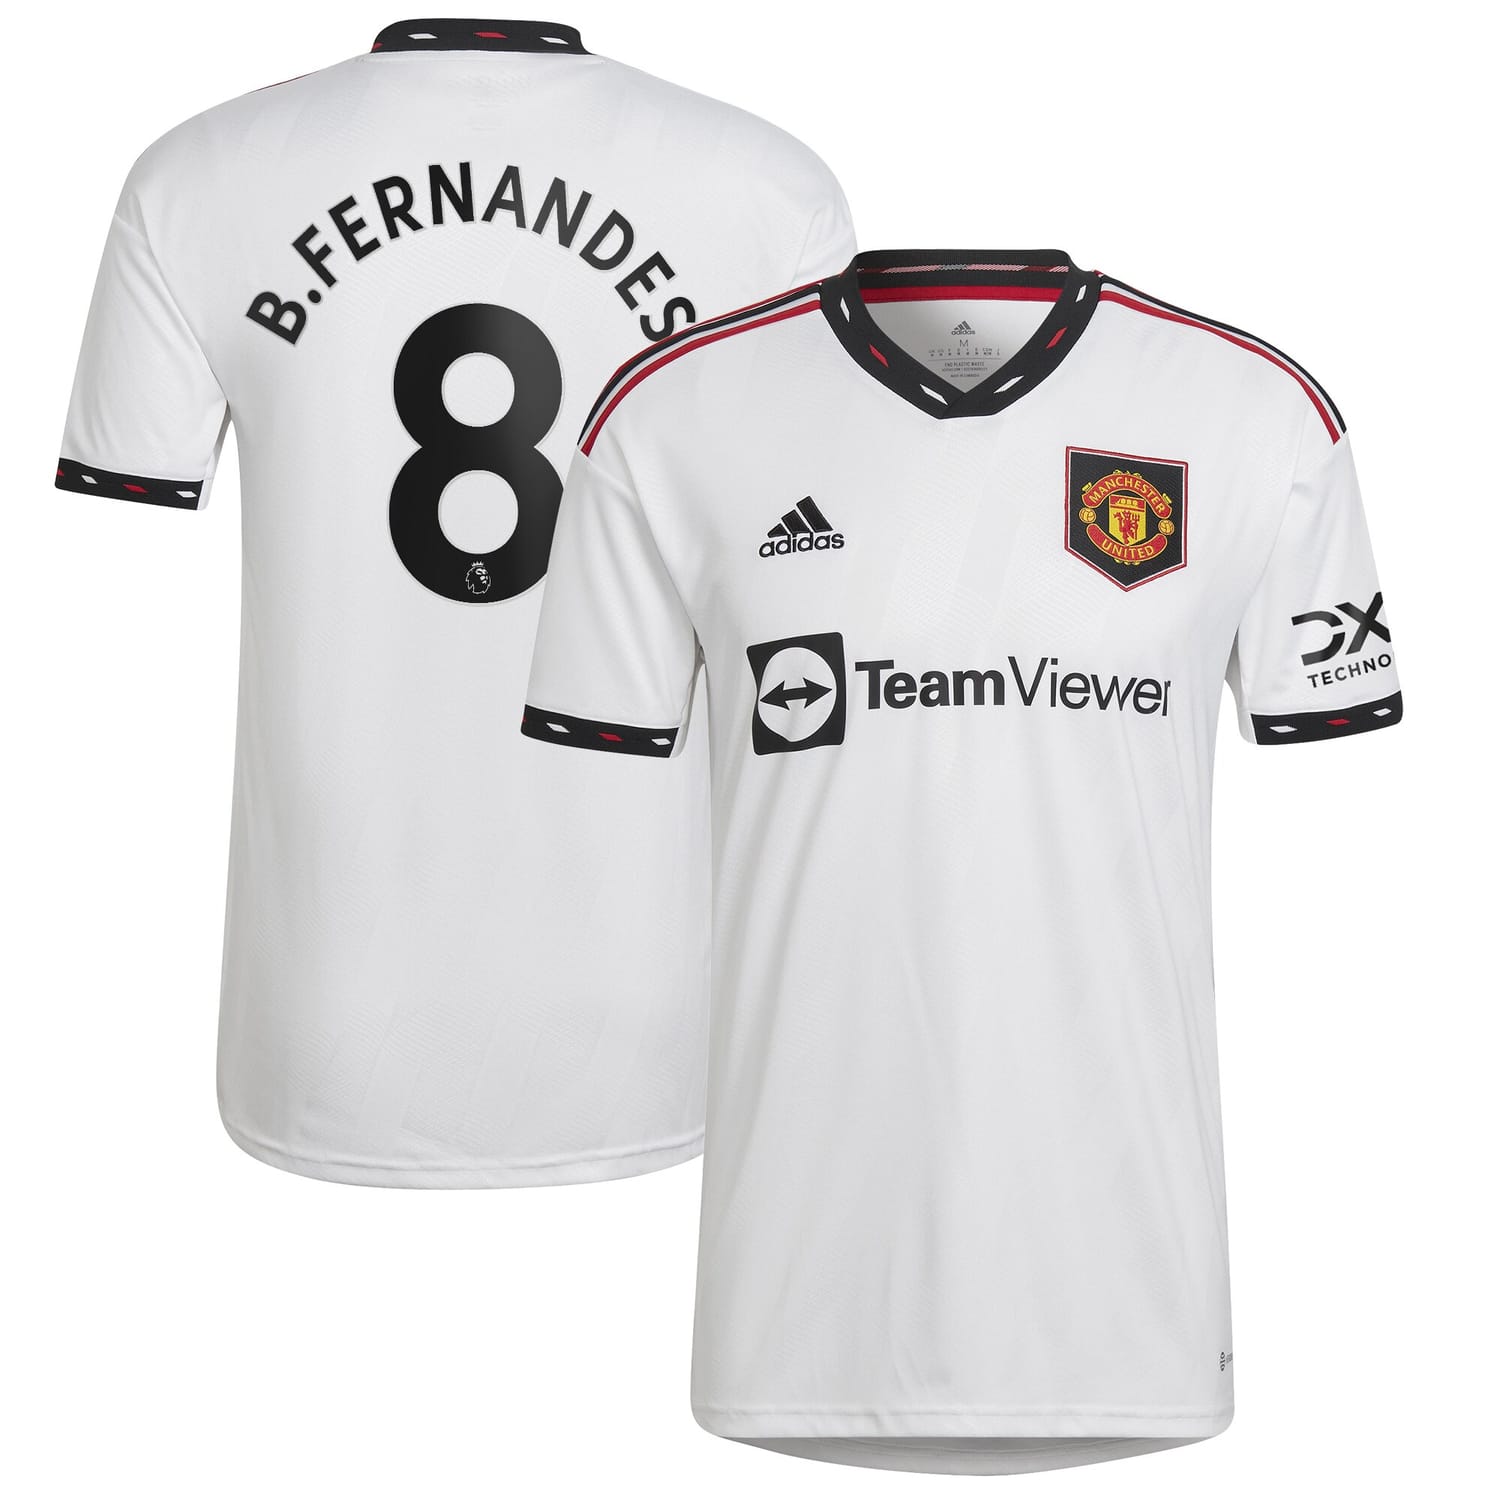 Premier League Manchester United Away Jersey Shirt White 2022-23 player Bruno Fernandes printing for Men